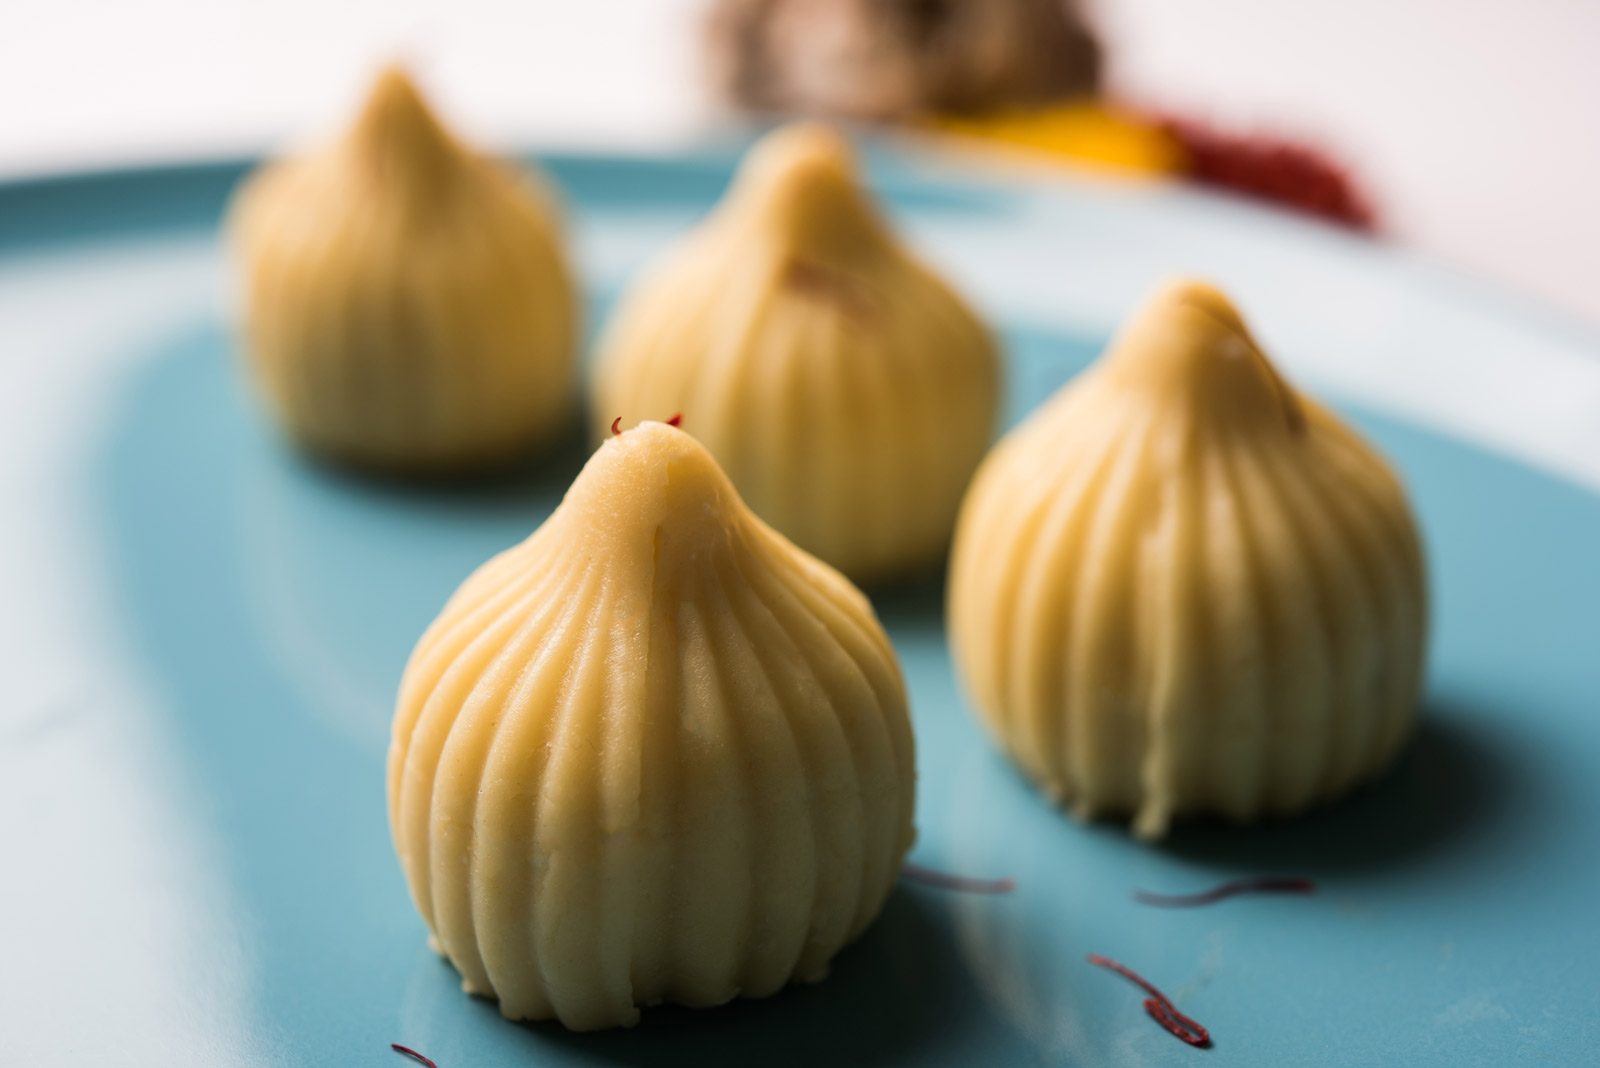 Modak traditional Indian sweet made with flour dumpling filled with freshly grated coconut and jaggery also for festivals and ceremonies